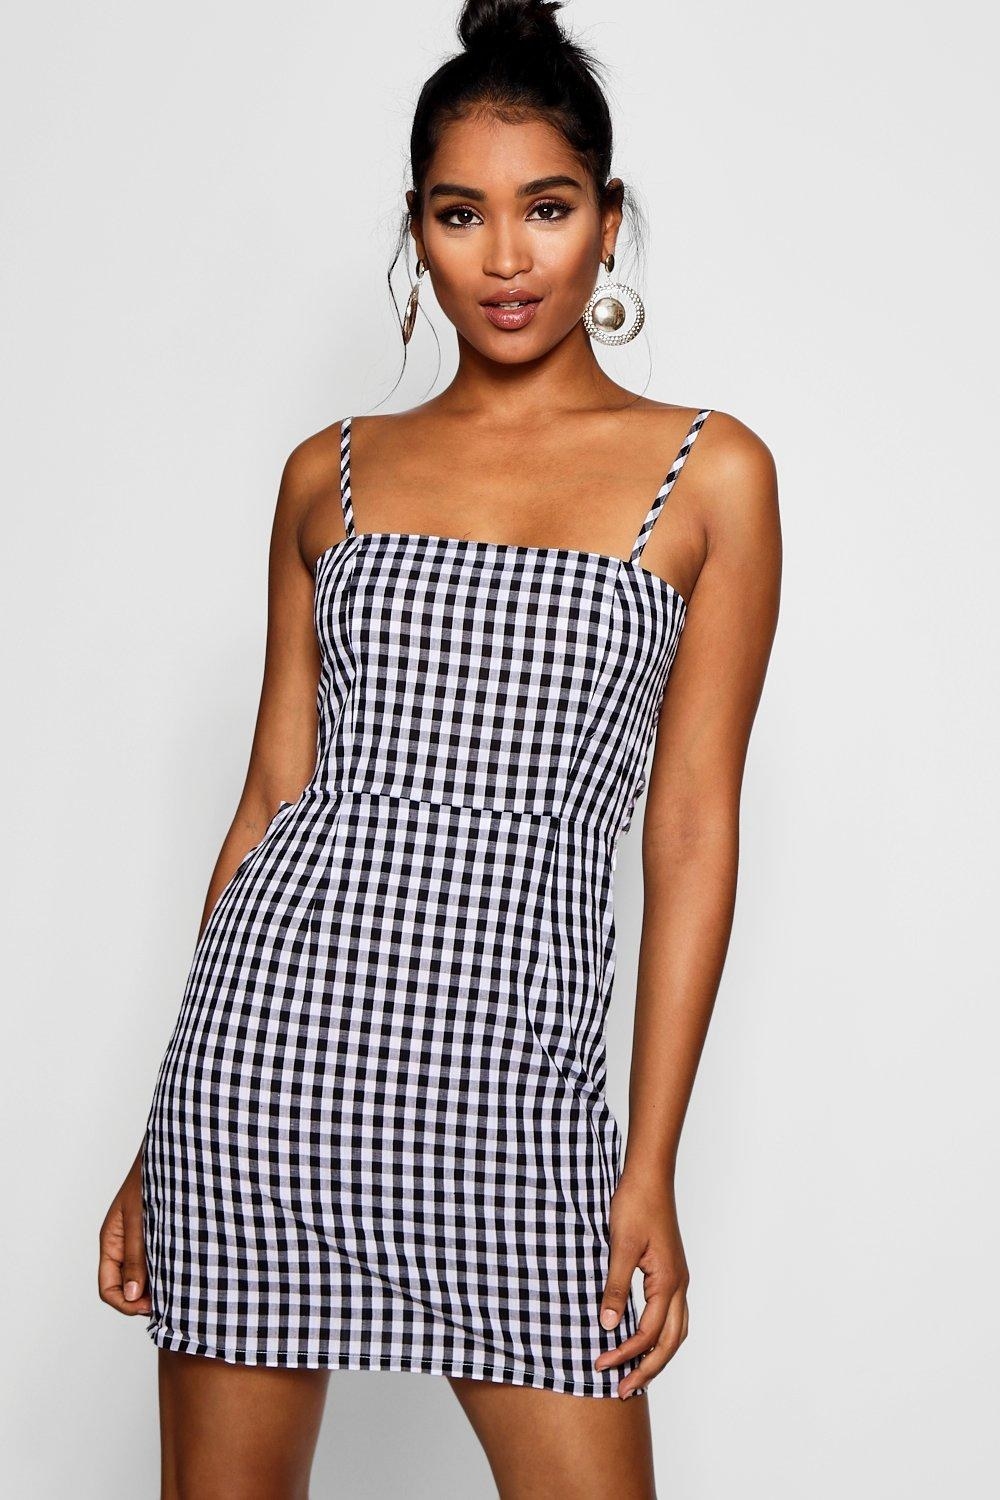 21 Things You're 1000% Going To Want From The HUGE Boohoo Sale